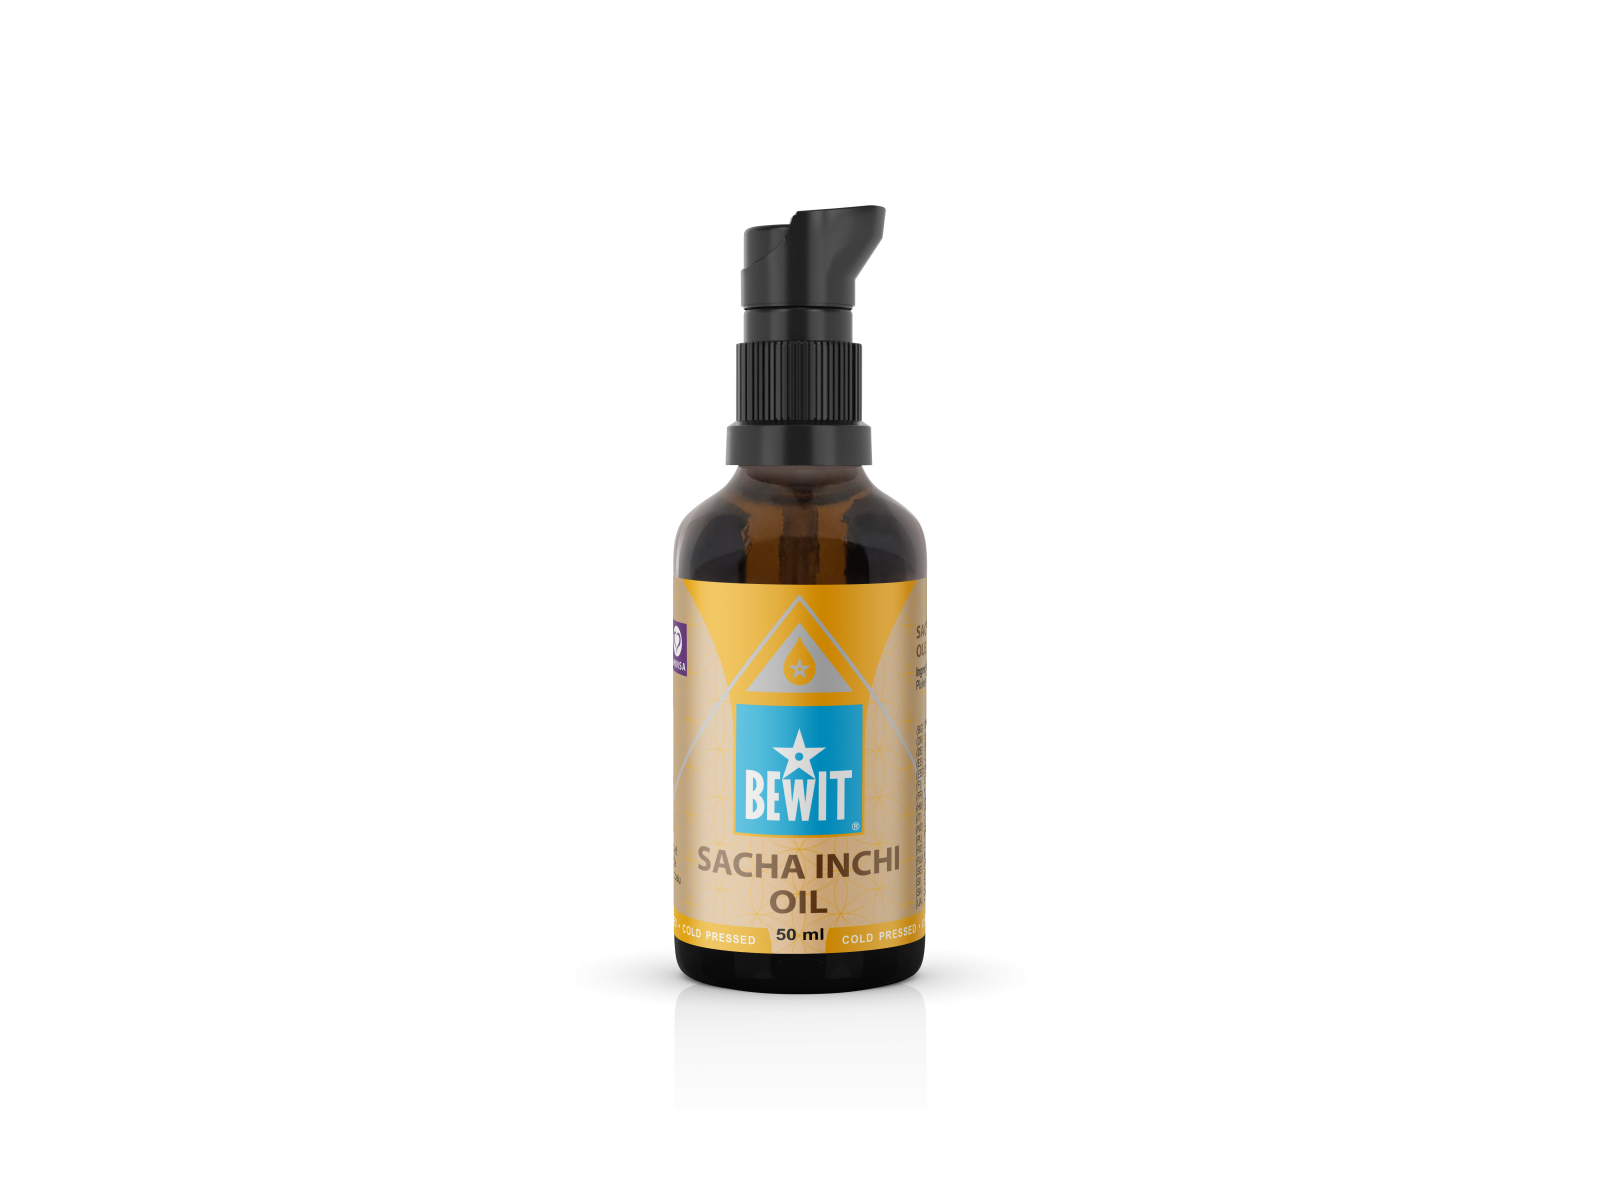 BEWIT Sacha Inchi oil, from seeds - 100% natural cosmetic oil